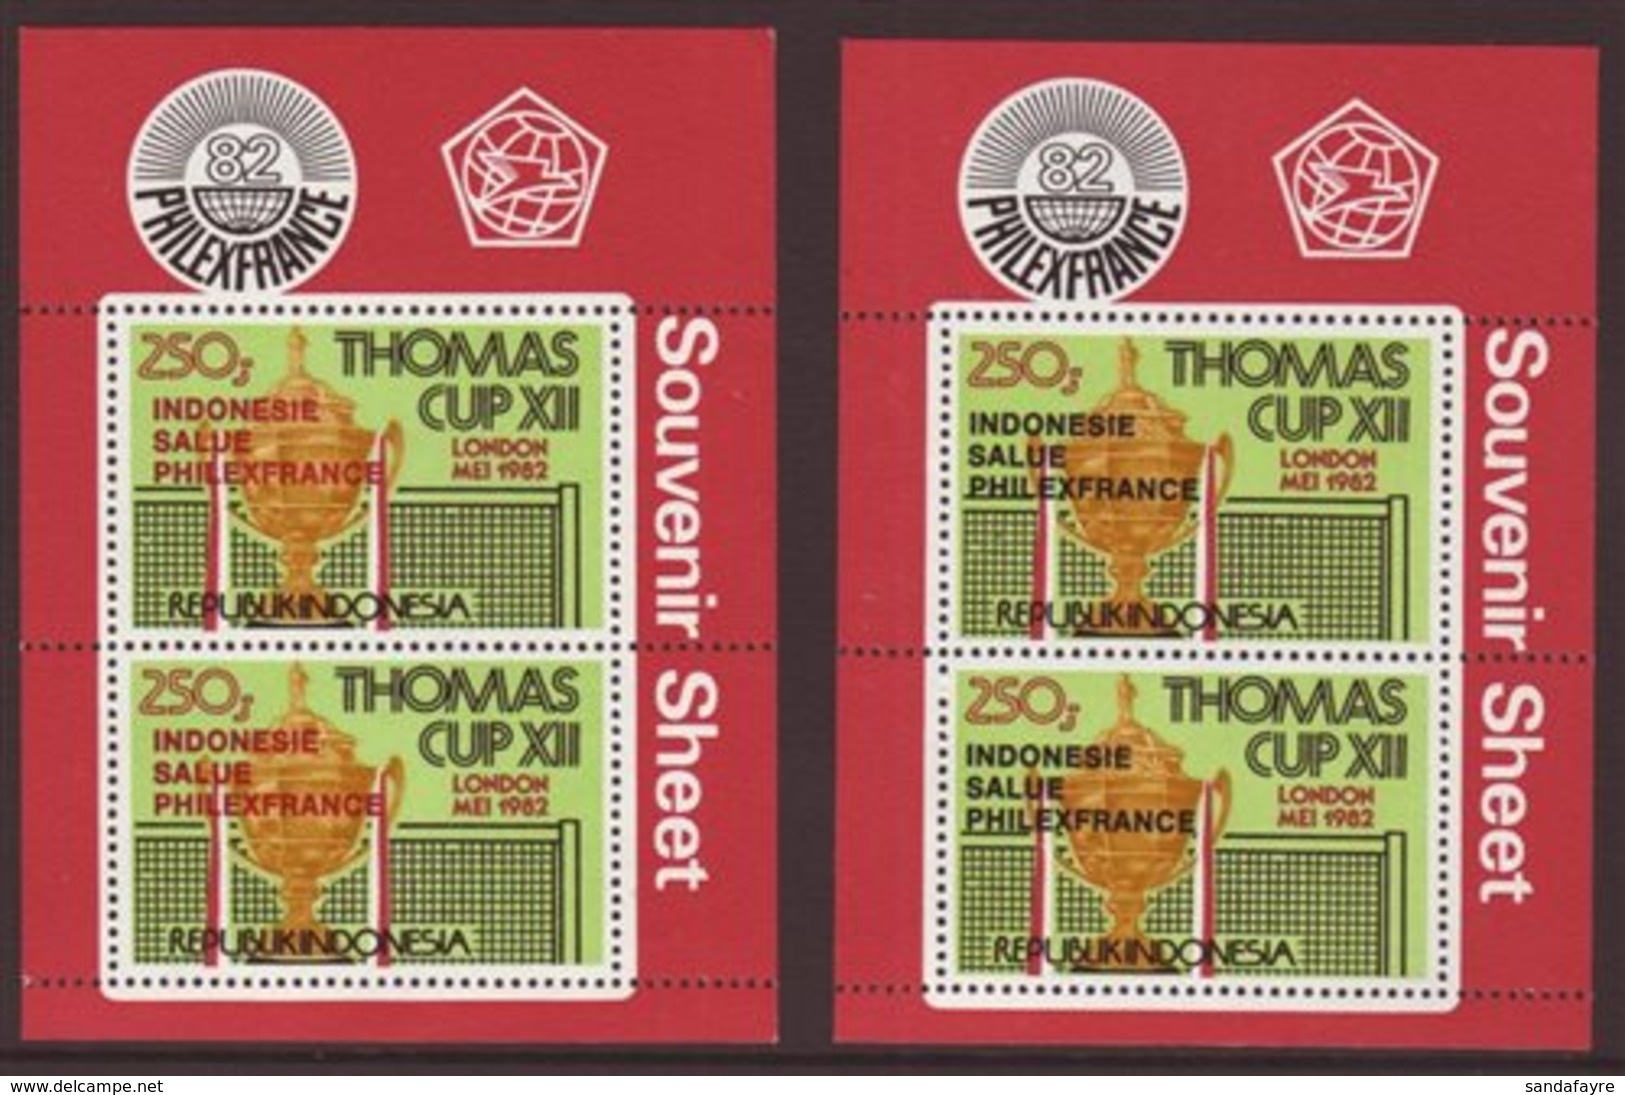 1982  Badminton Mini-sheets With "PHILEXFRANCE" Overprint In Red And In Black, See Notes After SG MS1673 Or Scott 1176a, - Indonesia